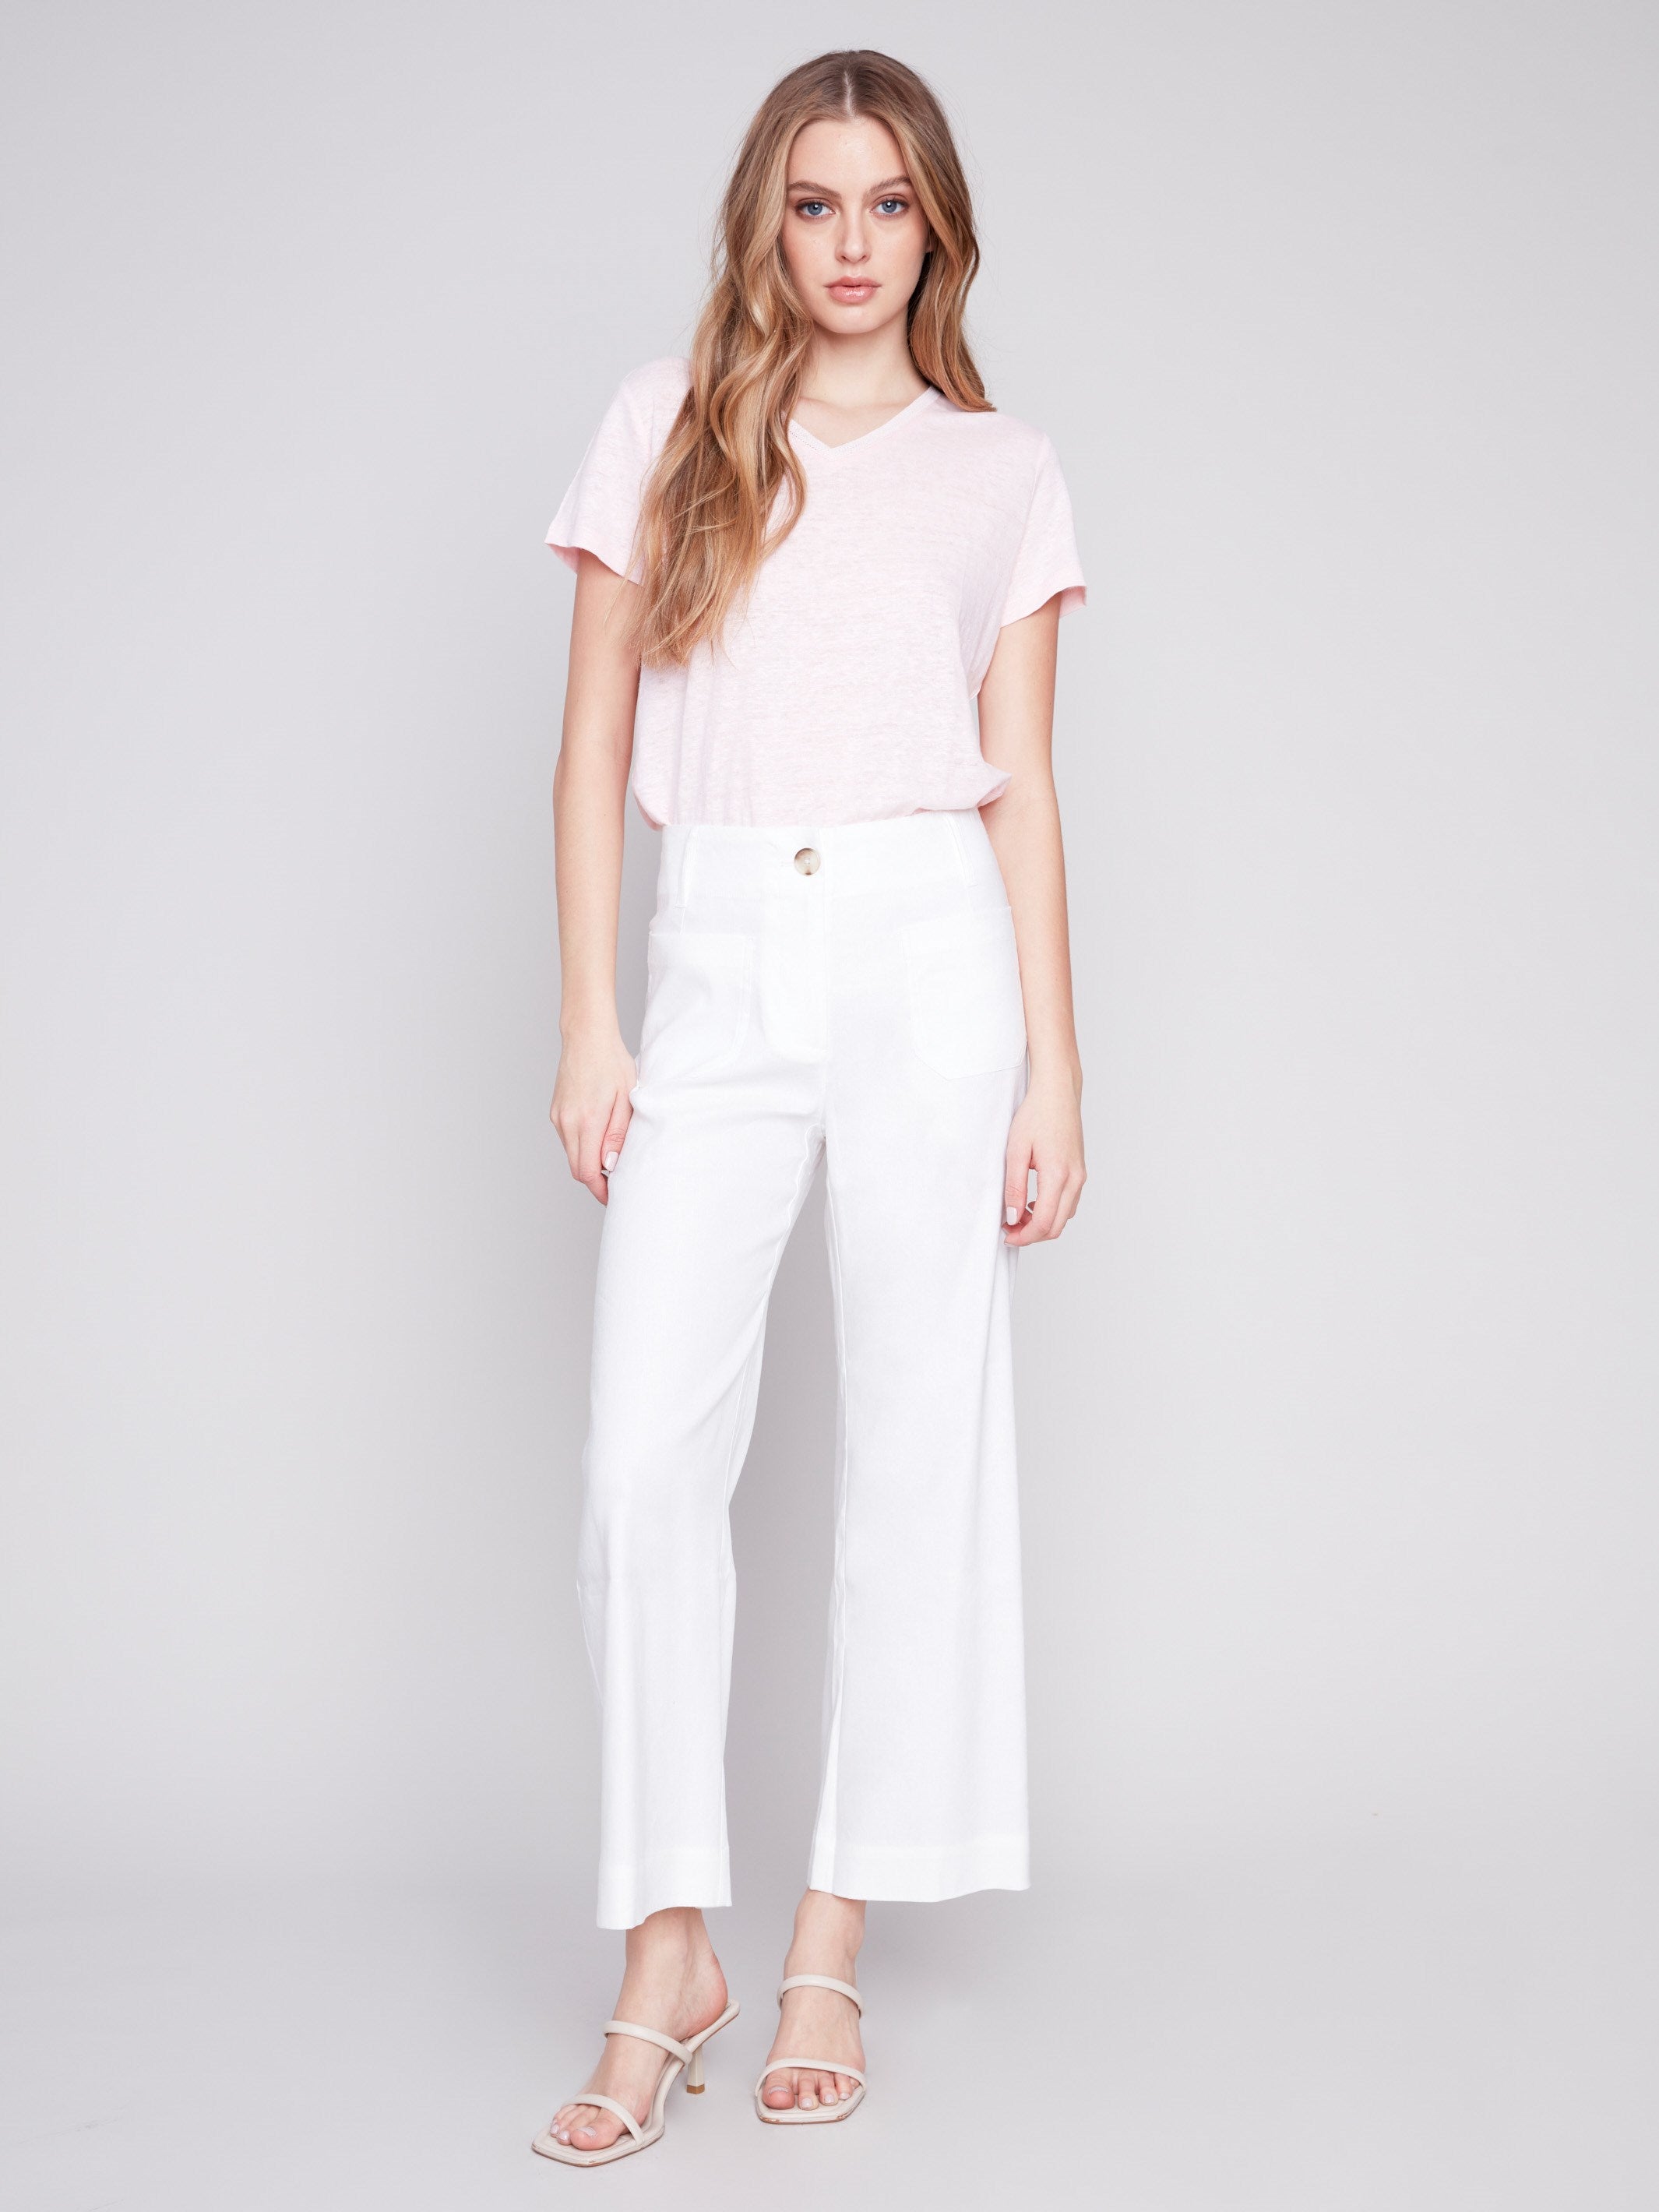 Charlie B Cropped Linen Blend Pants - White - Image 1